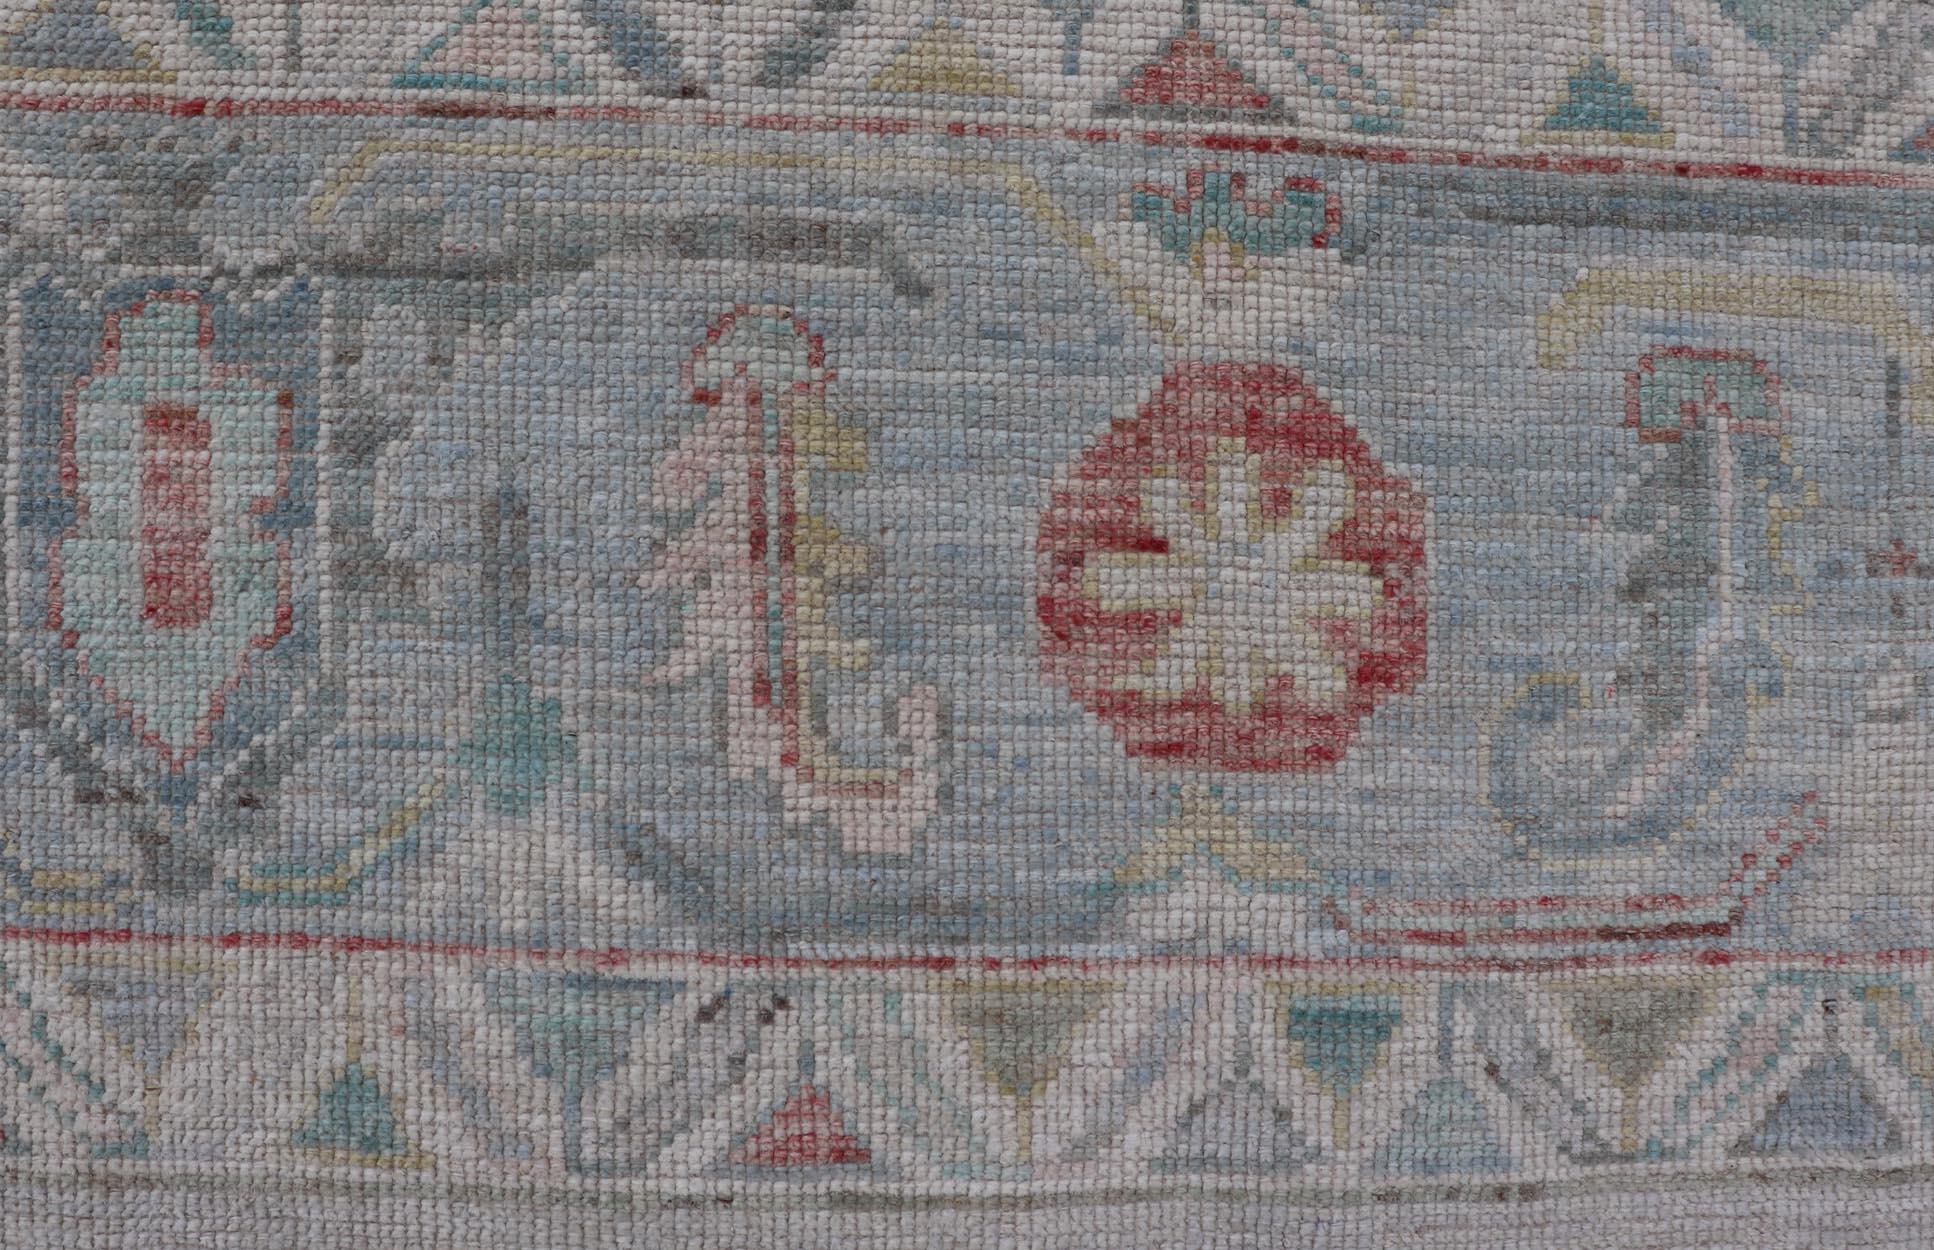 Large Modern Oushak with floral design on light blue/gray border with pops of color. Keivan Woven Arts; rug AWR-9004 Country of Origin: Afghanistan Type: Oushak Design: Mosaic Floral, All-Over. 21st century.

Measures: 10'1 x 13'10.

The field is